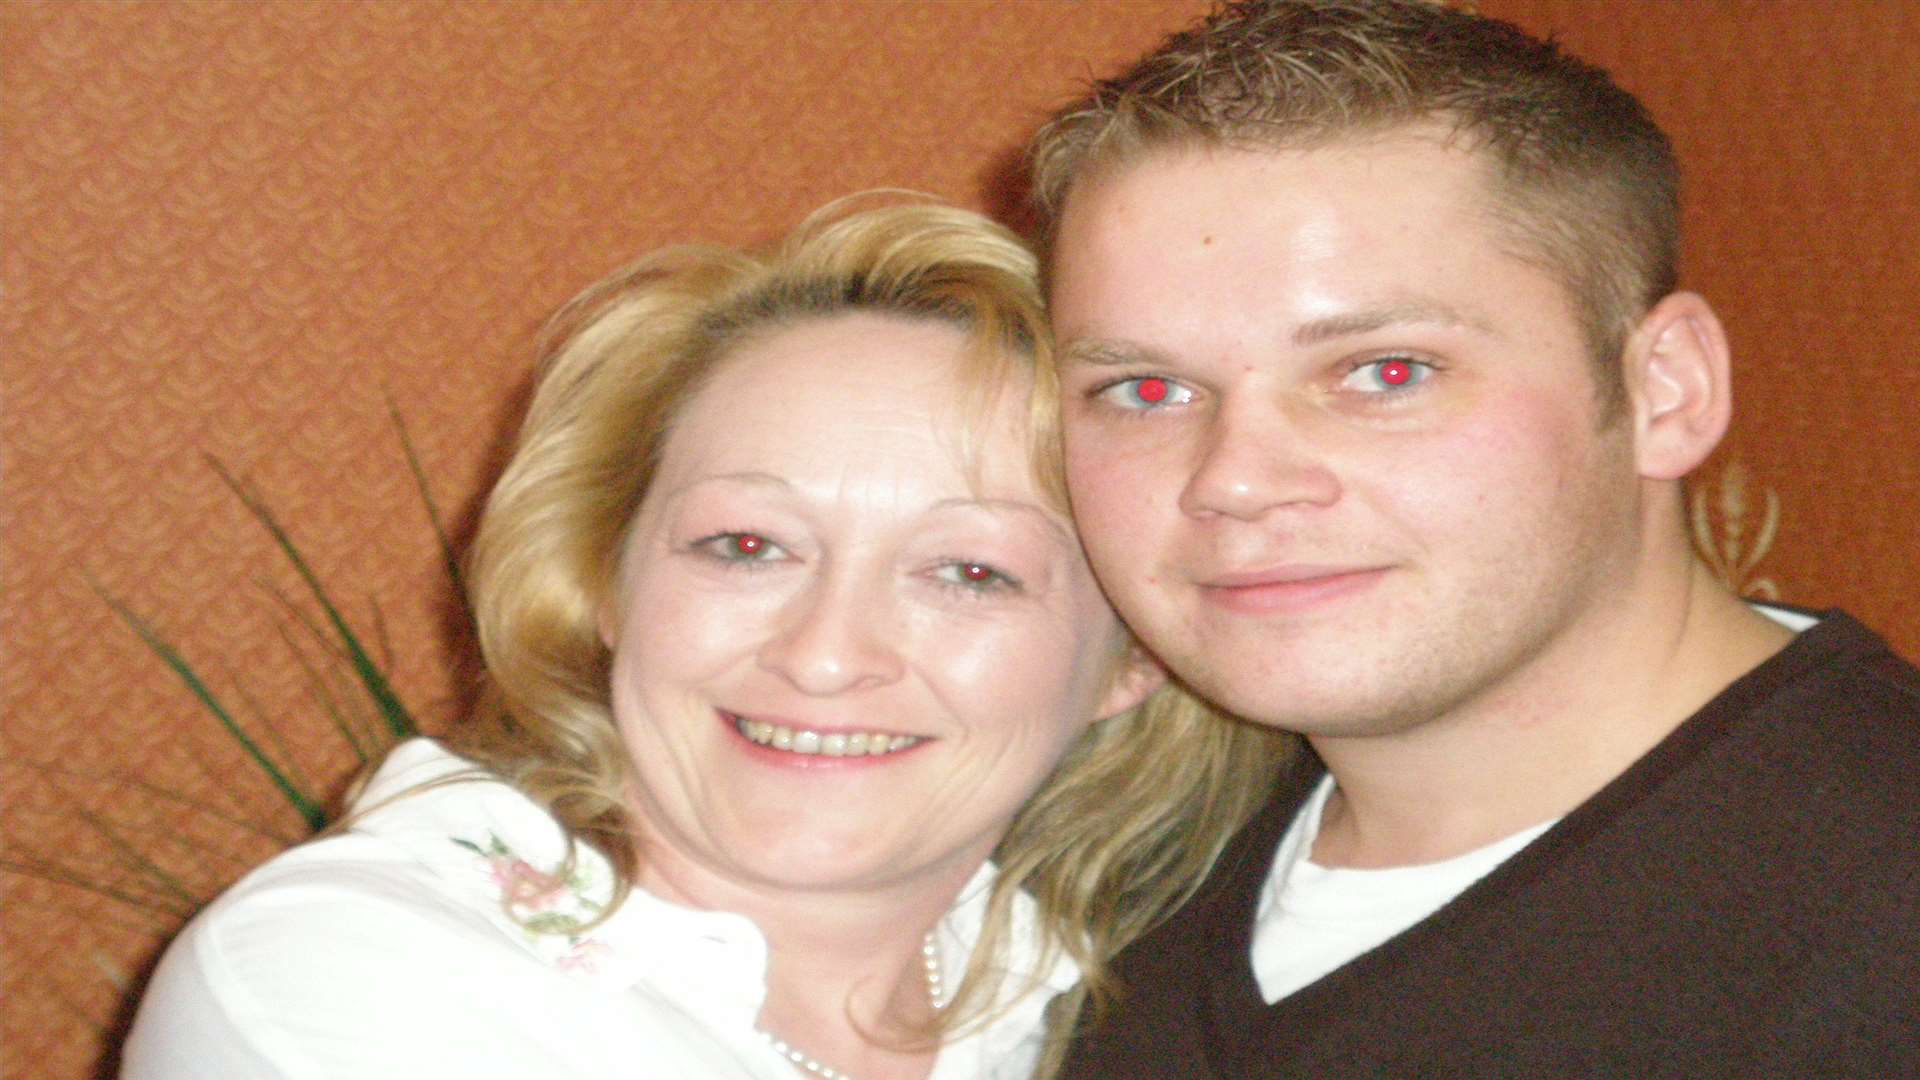 Anne Tribe, pictured with her nephew, Grant, took her own life because of the stress of work, an inquest heard